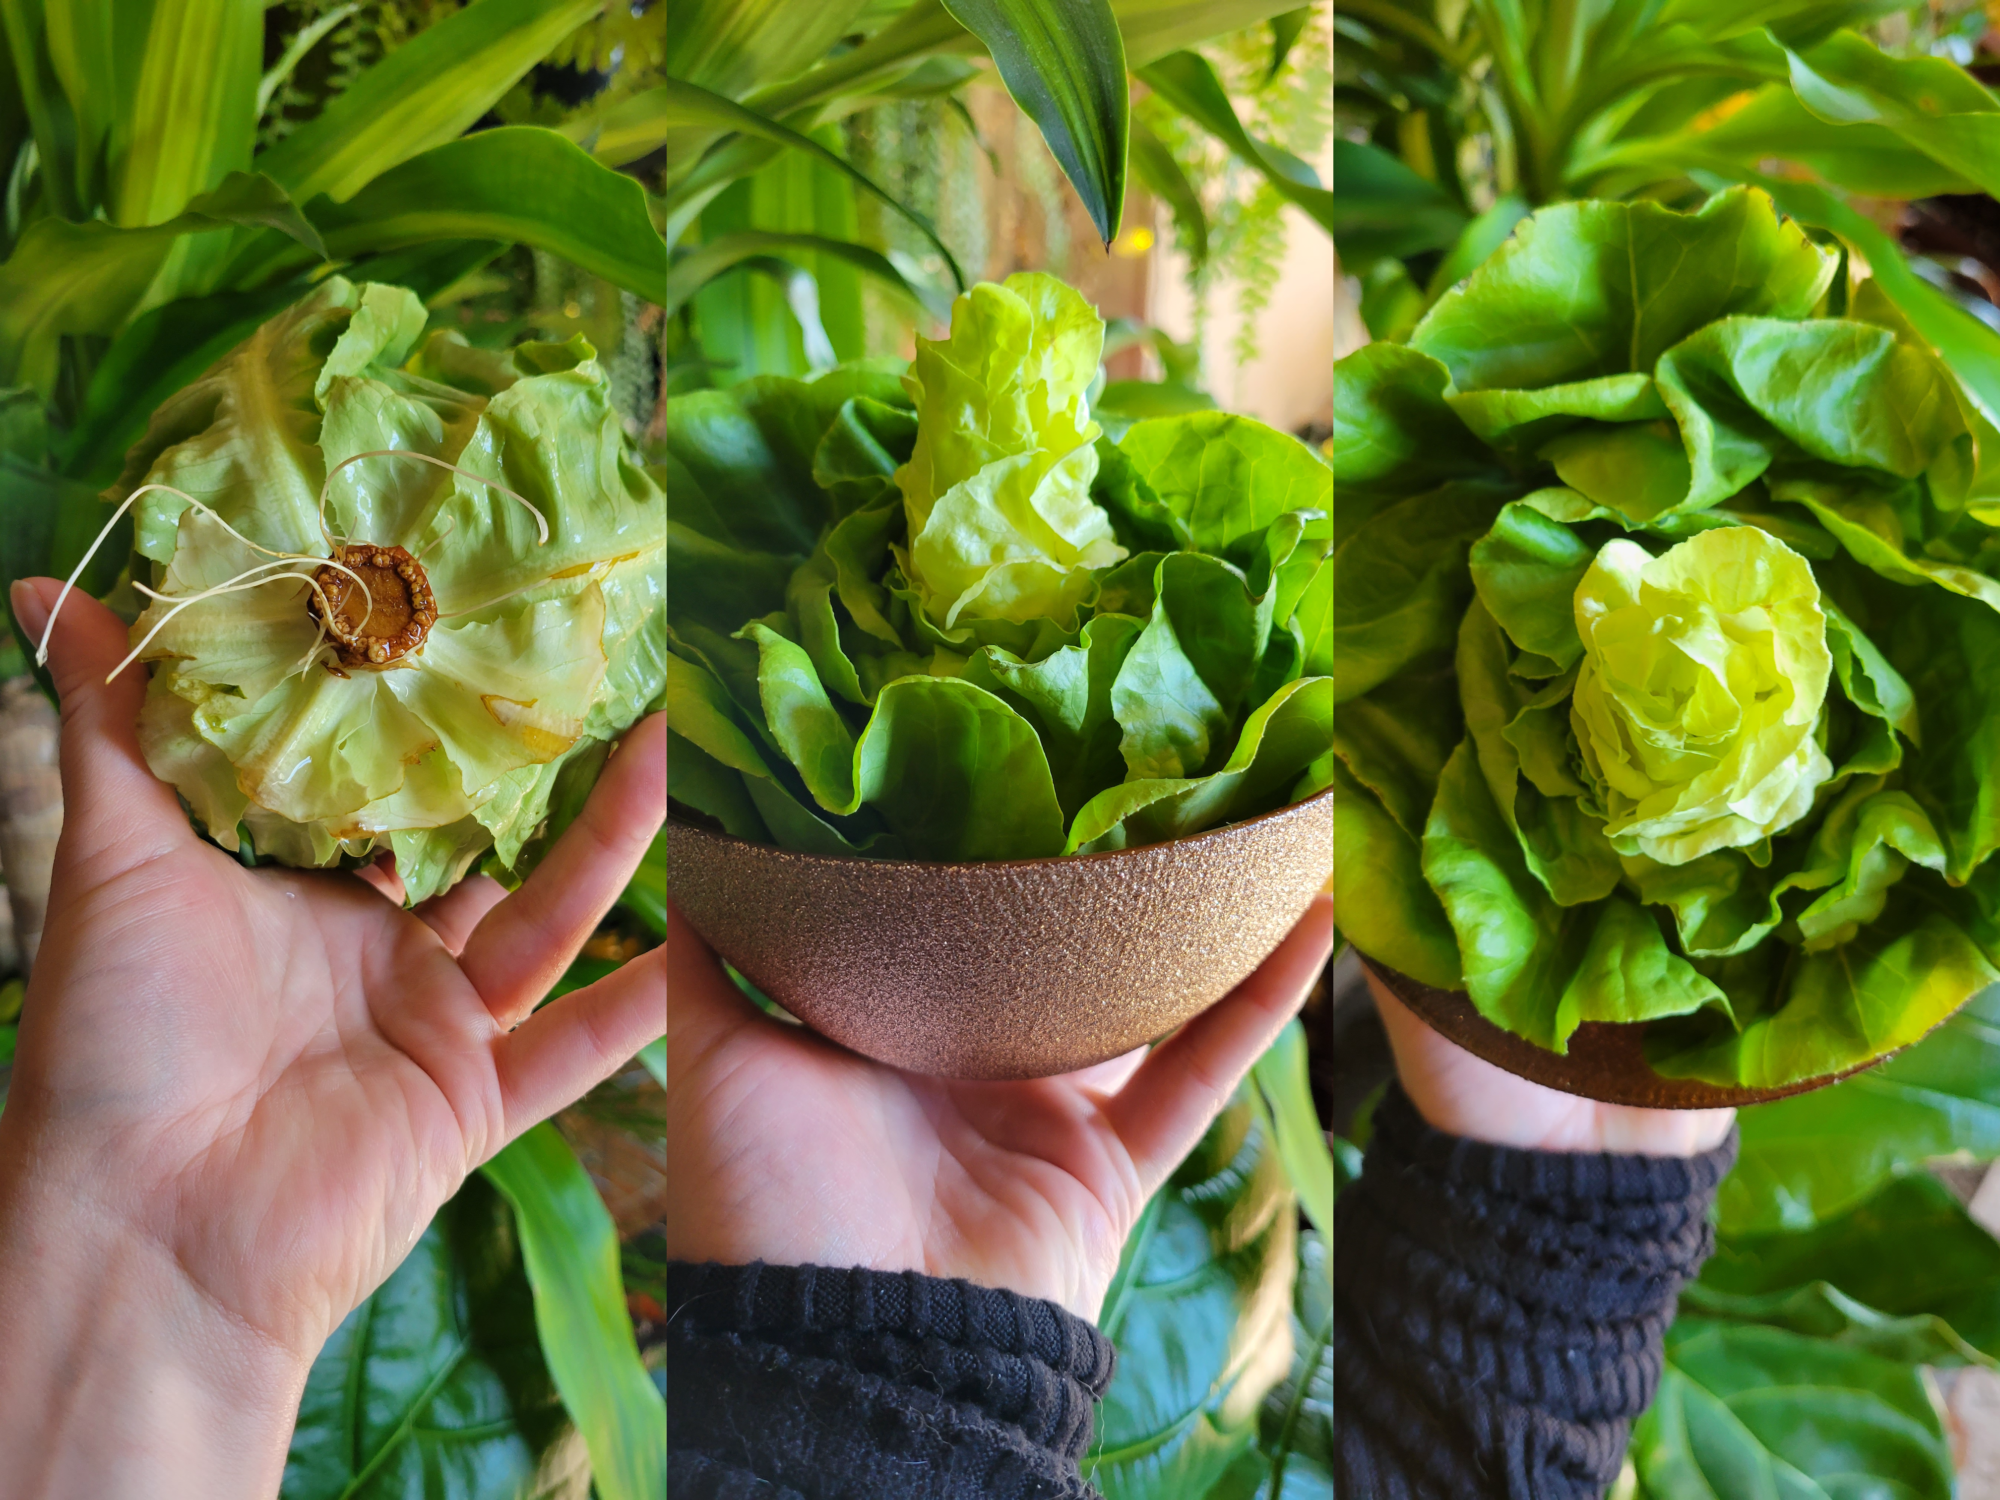 Top 5 Tips on How to Keep Lettuce From Wilting